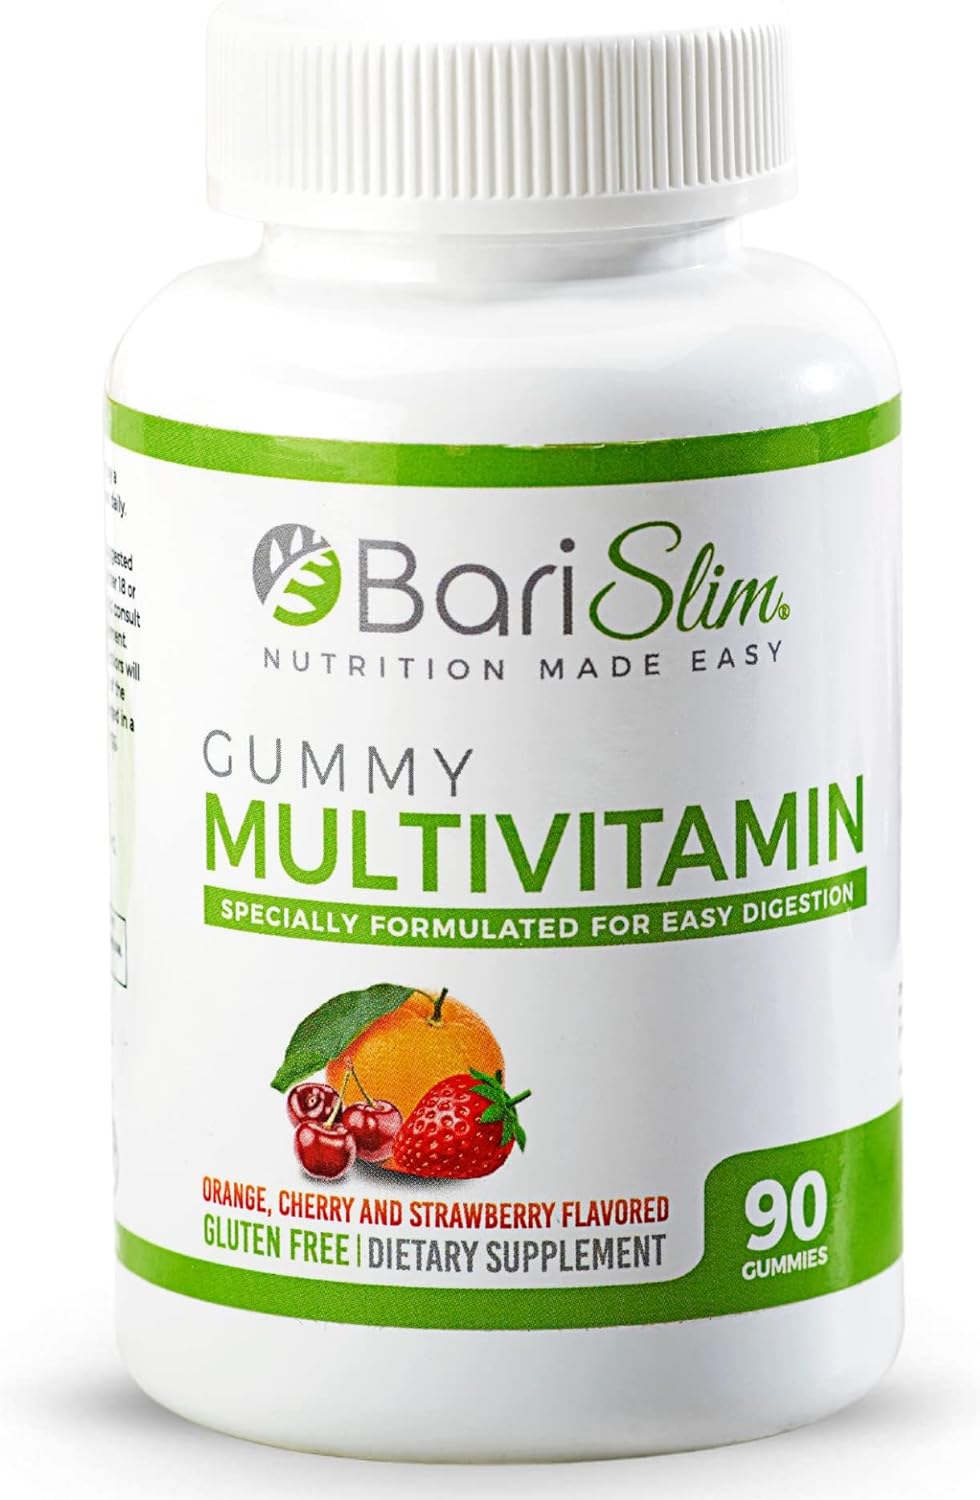 Bariatric Chewable Multivitamin Gummies - Specially Formulated Gummy Vitamin for Patients After Weight Loss Surgery - Easy to Digest & Great Tasting Fruit Flavors | 90 Fruit Chews